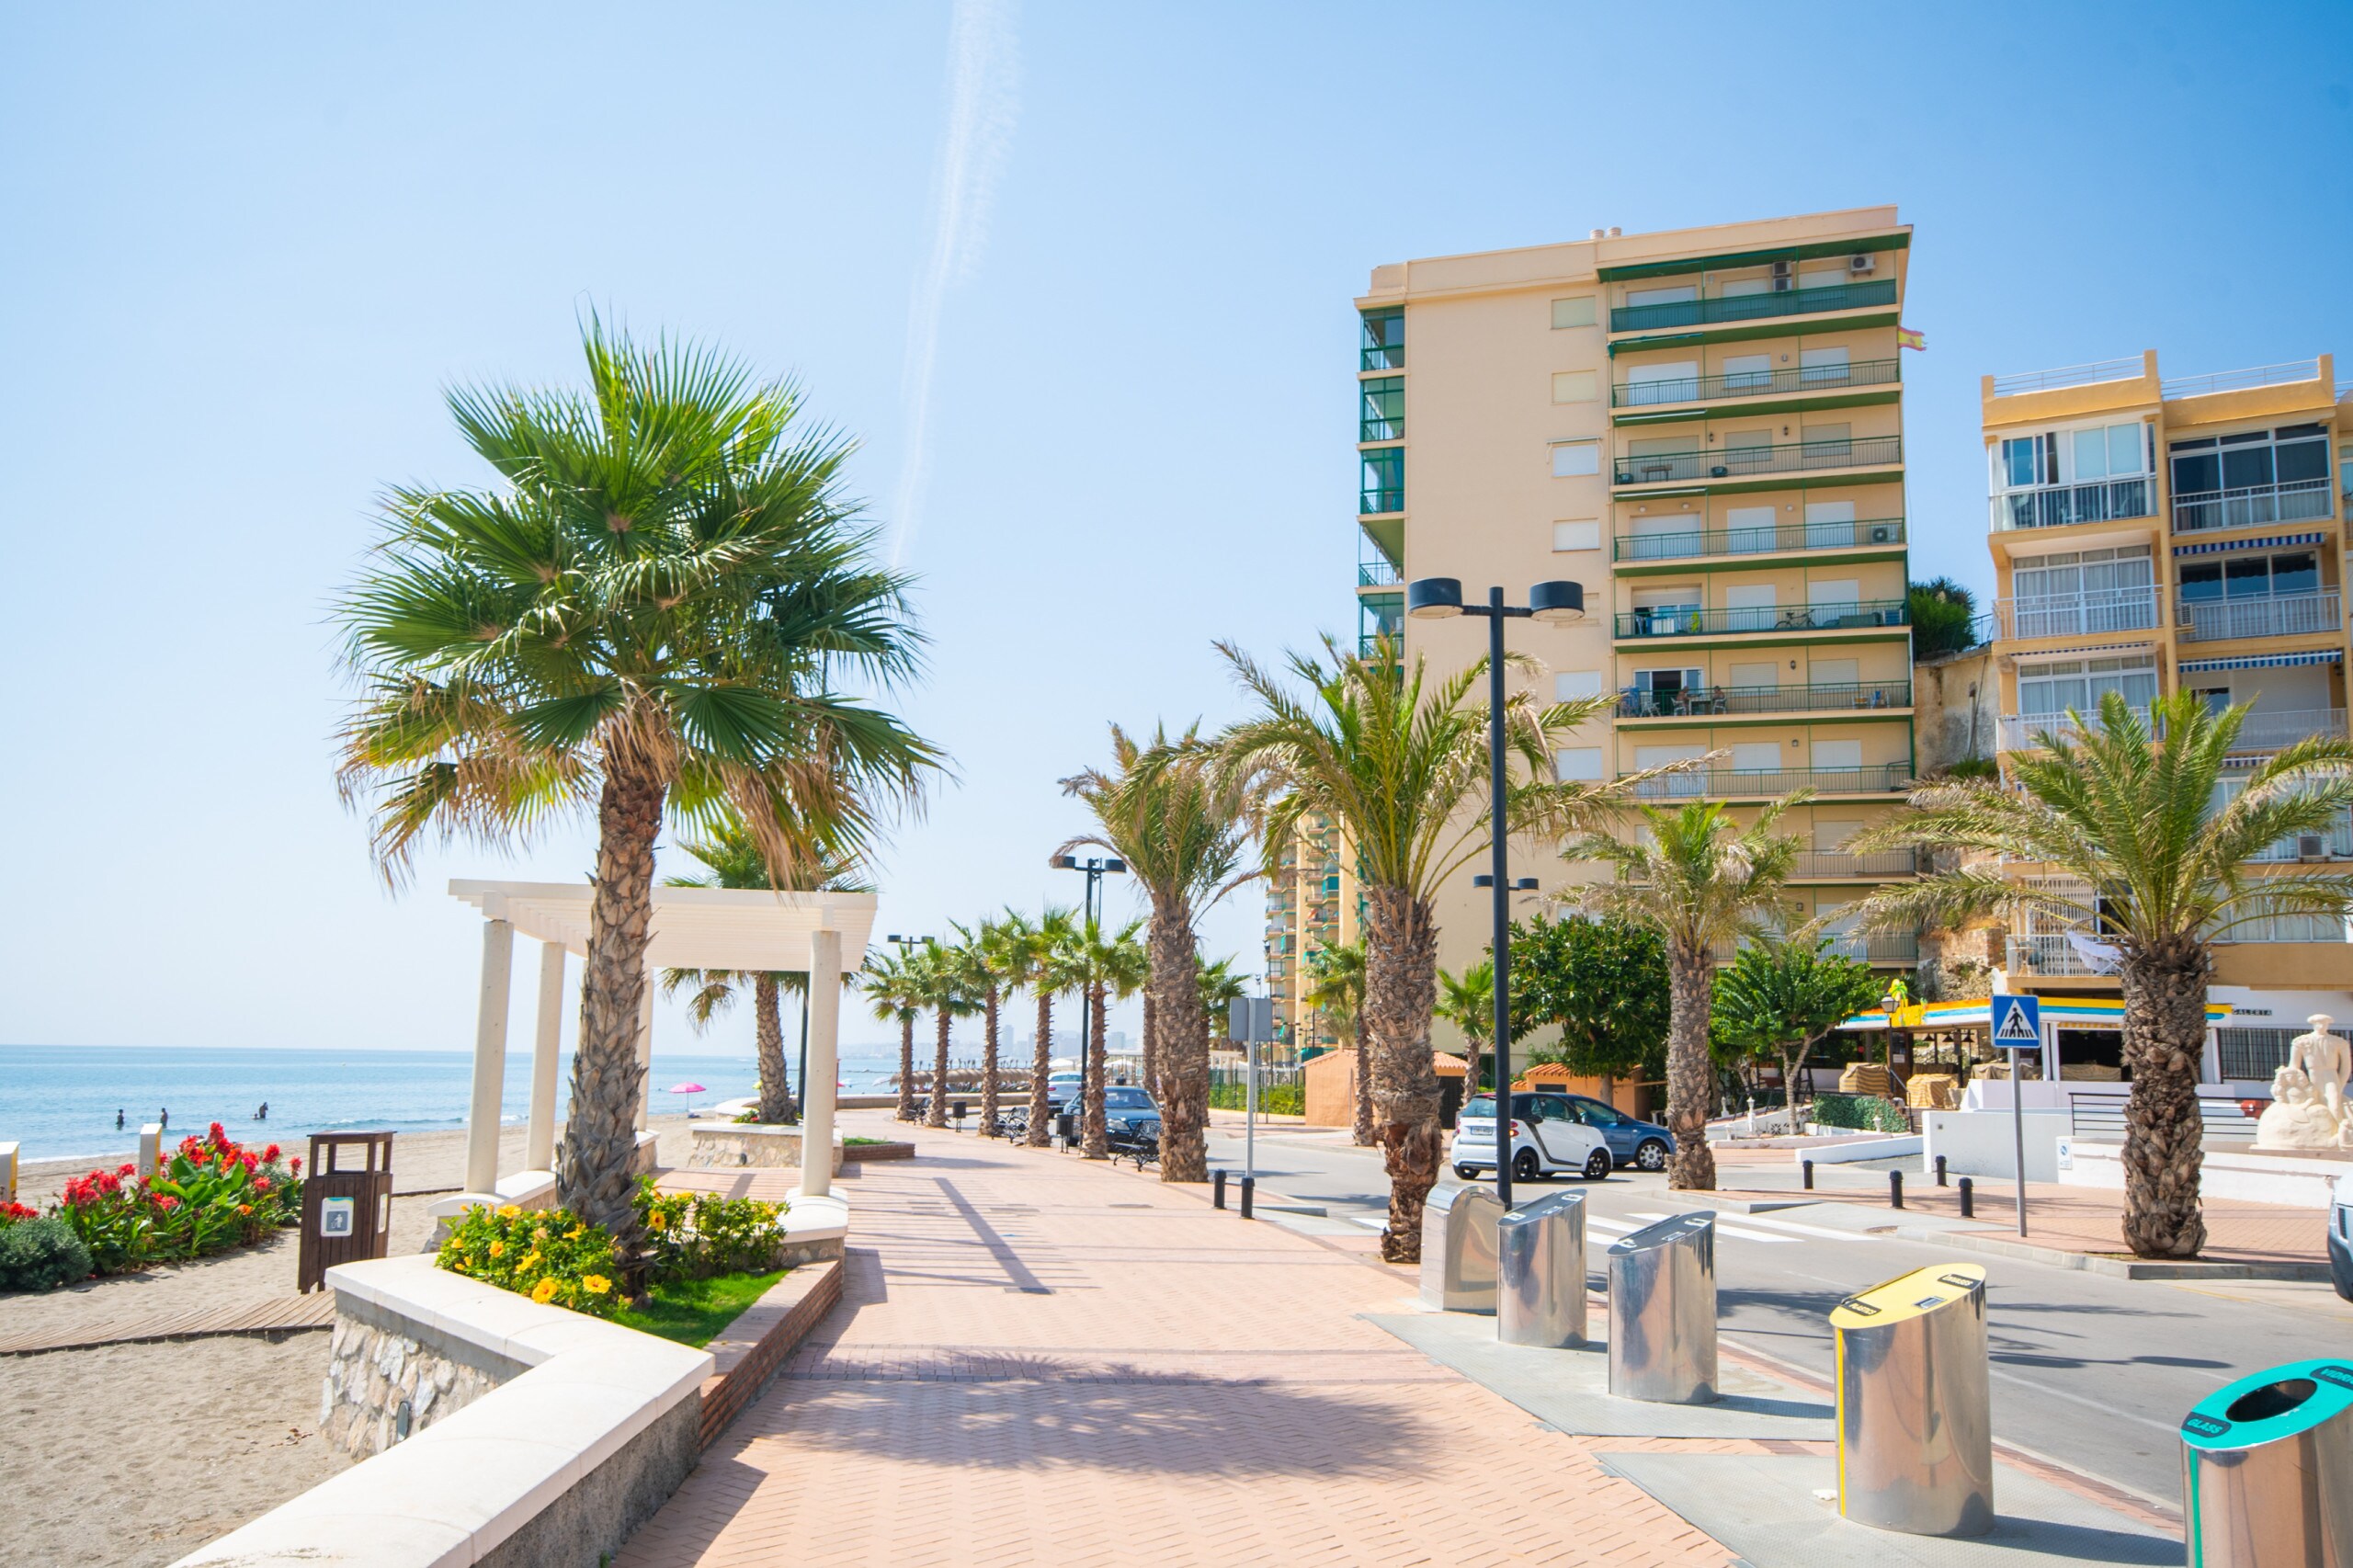 Enjoy the nearby beach that this apartment in Fuengirola has